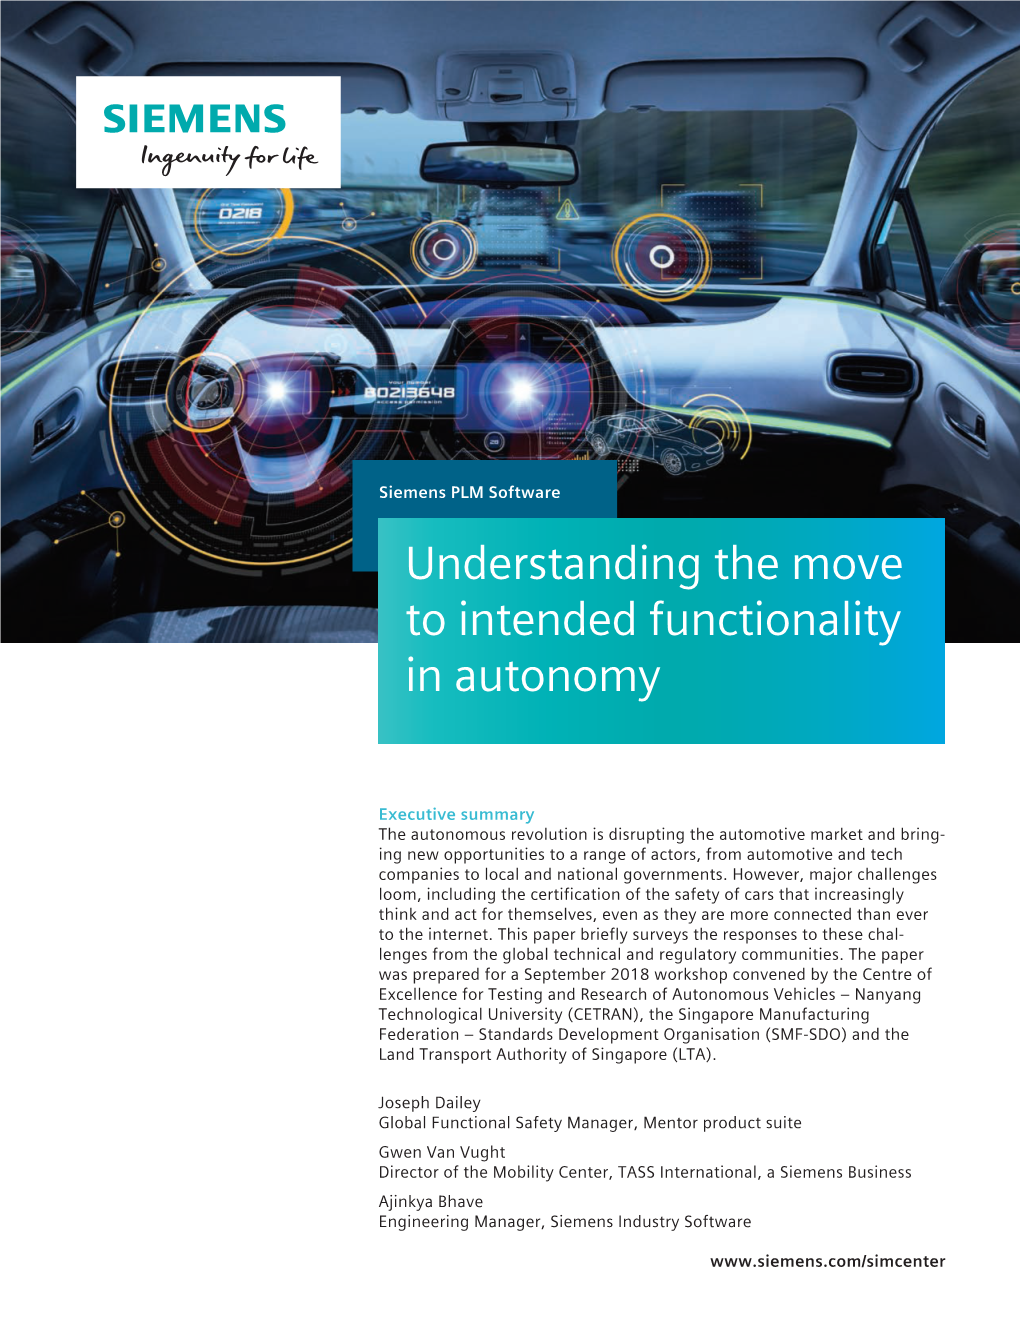 Understanding the Move to Intended Functionality in Autonomy